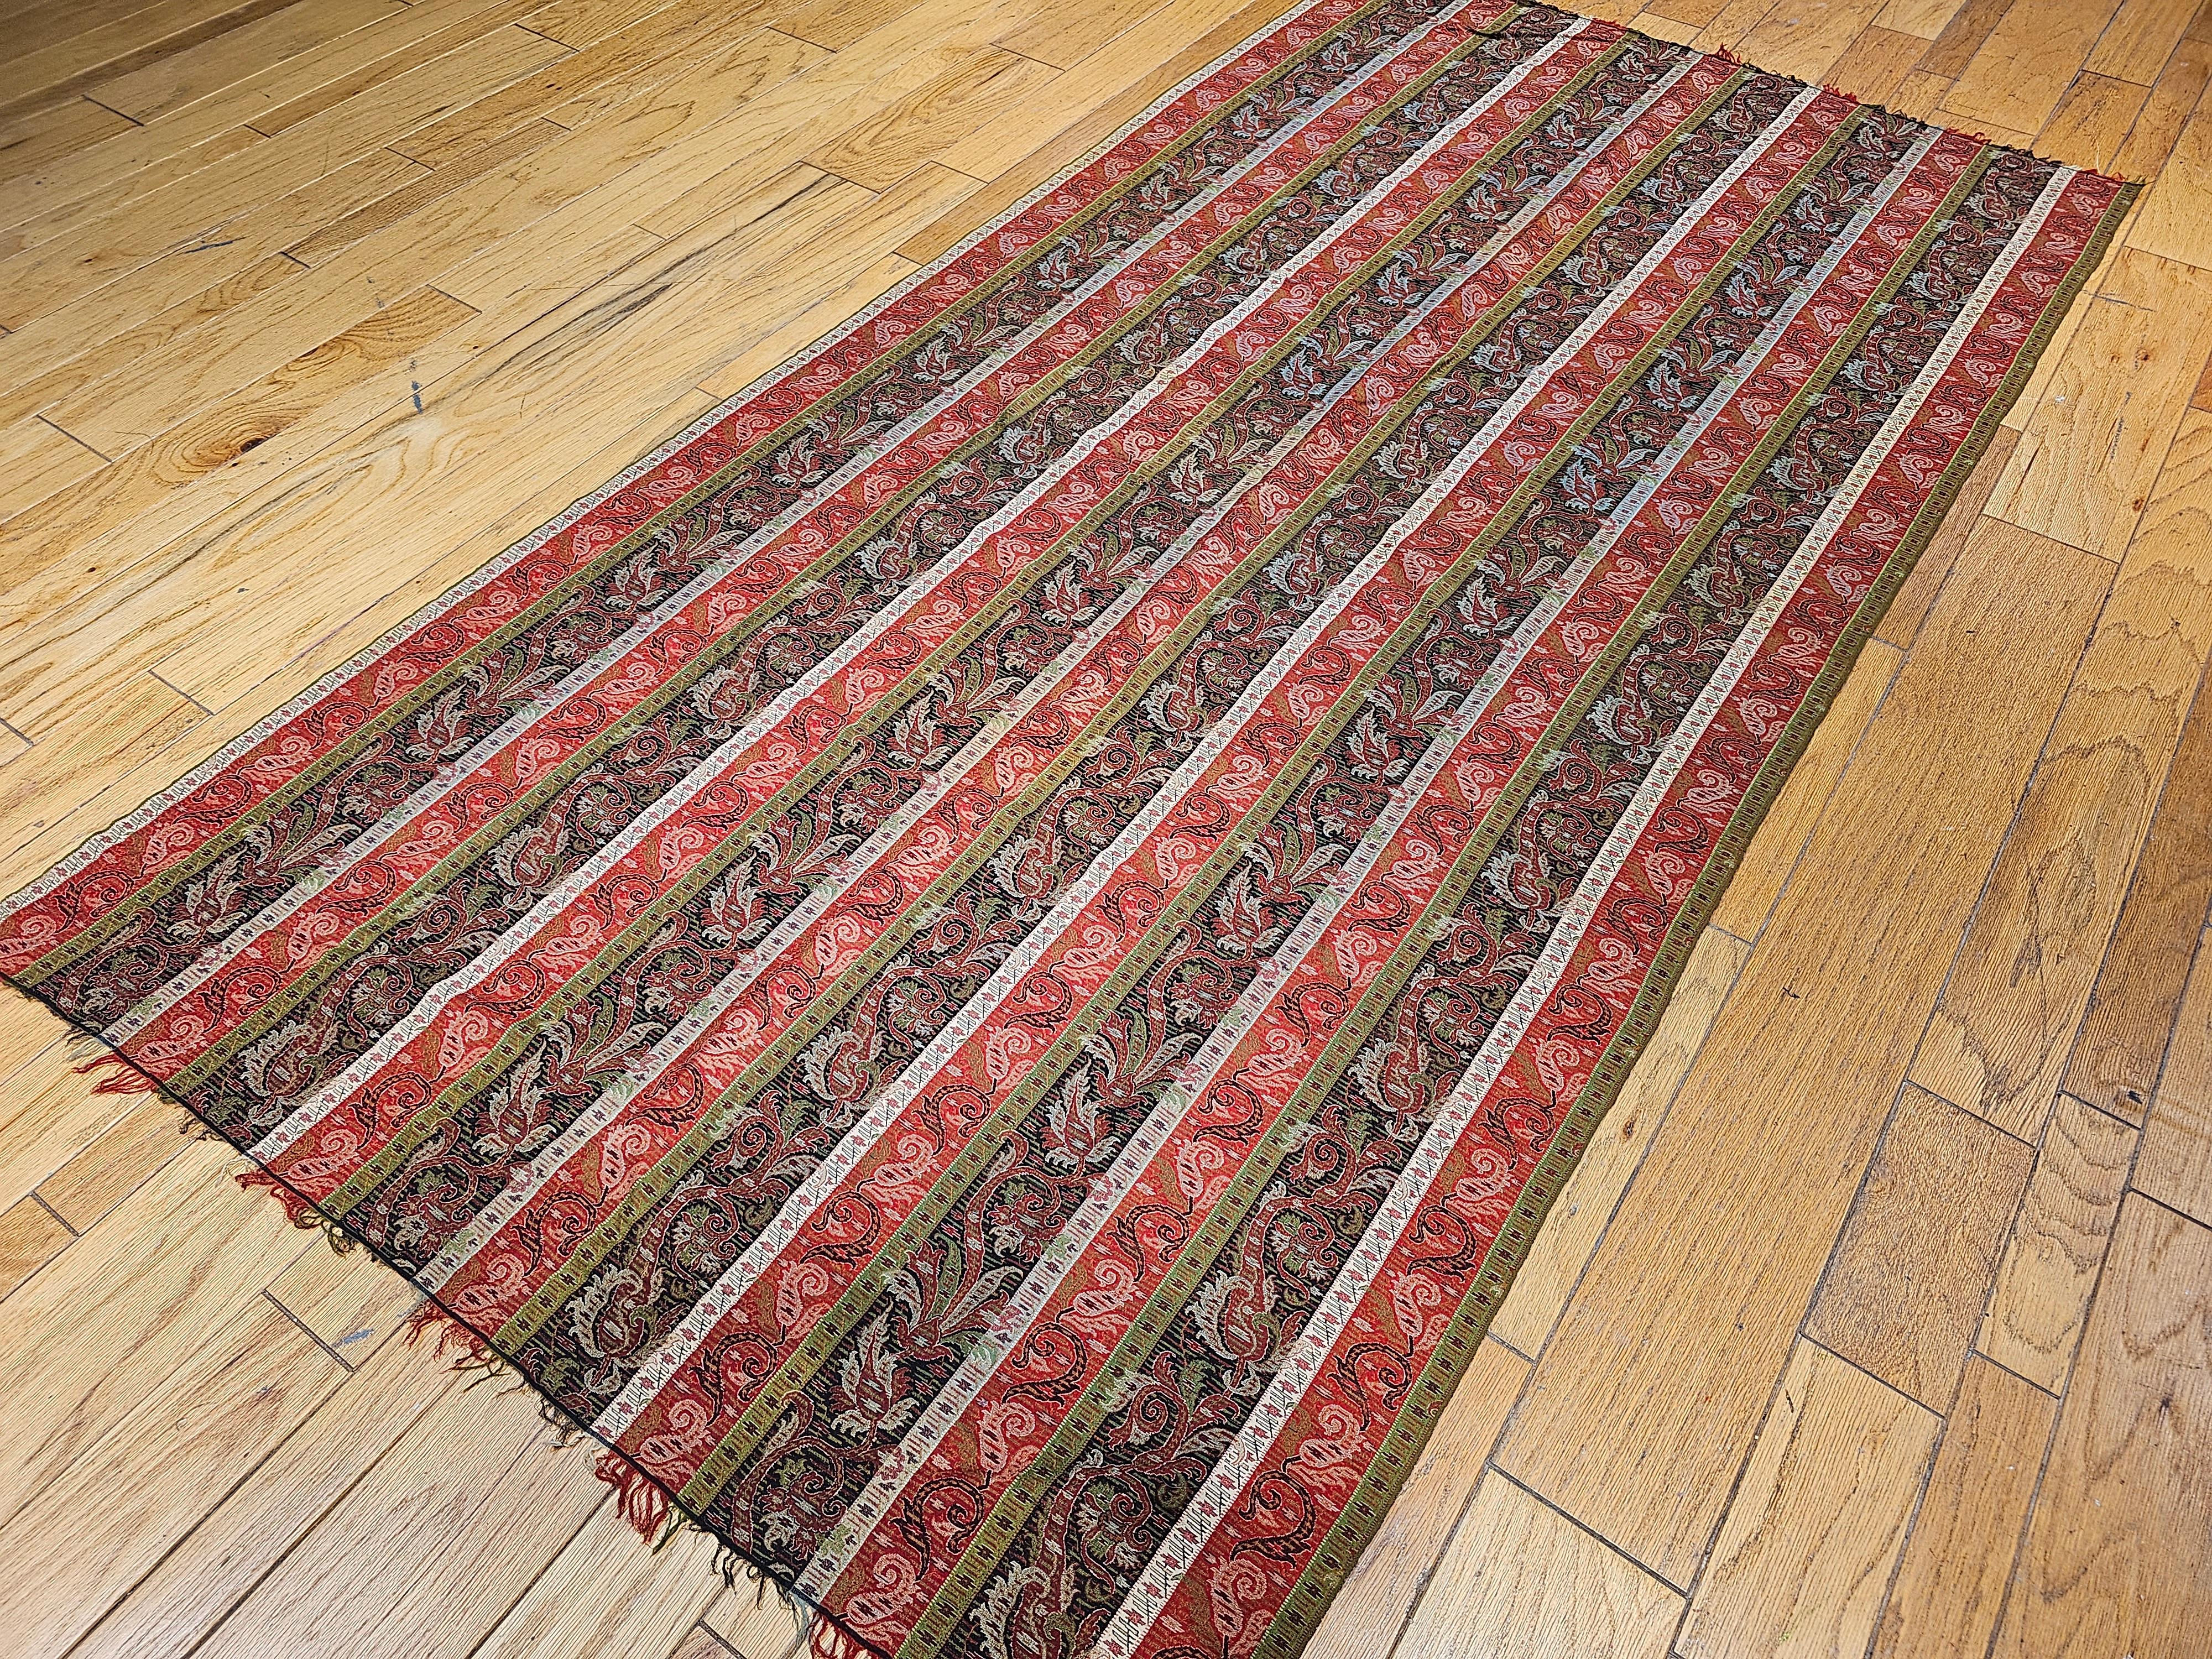 19th Century Hand-Woven Kashmiri Paisley Shawl in Brick Red, Ivory, Black, Green For Sale 5